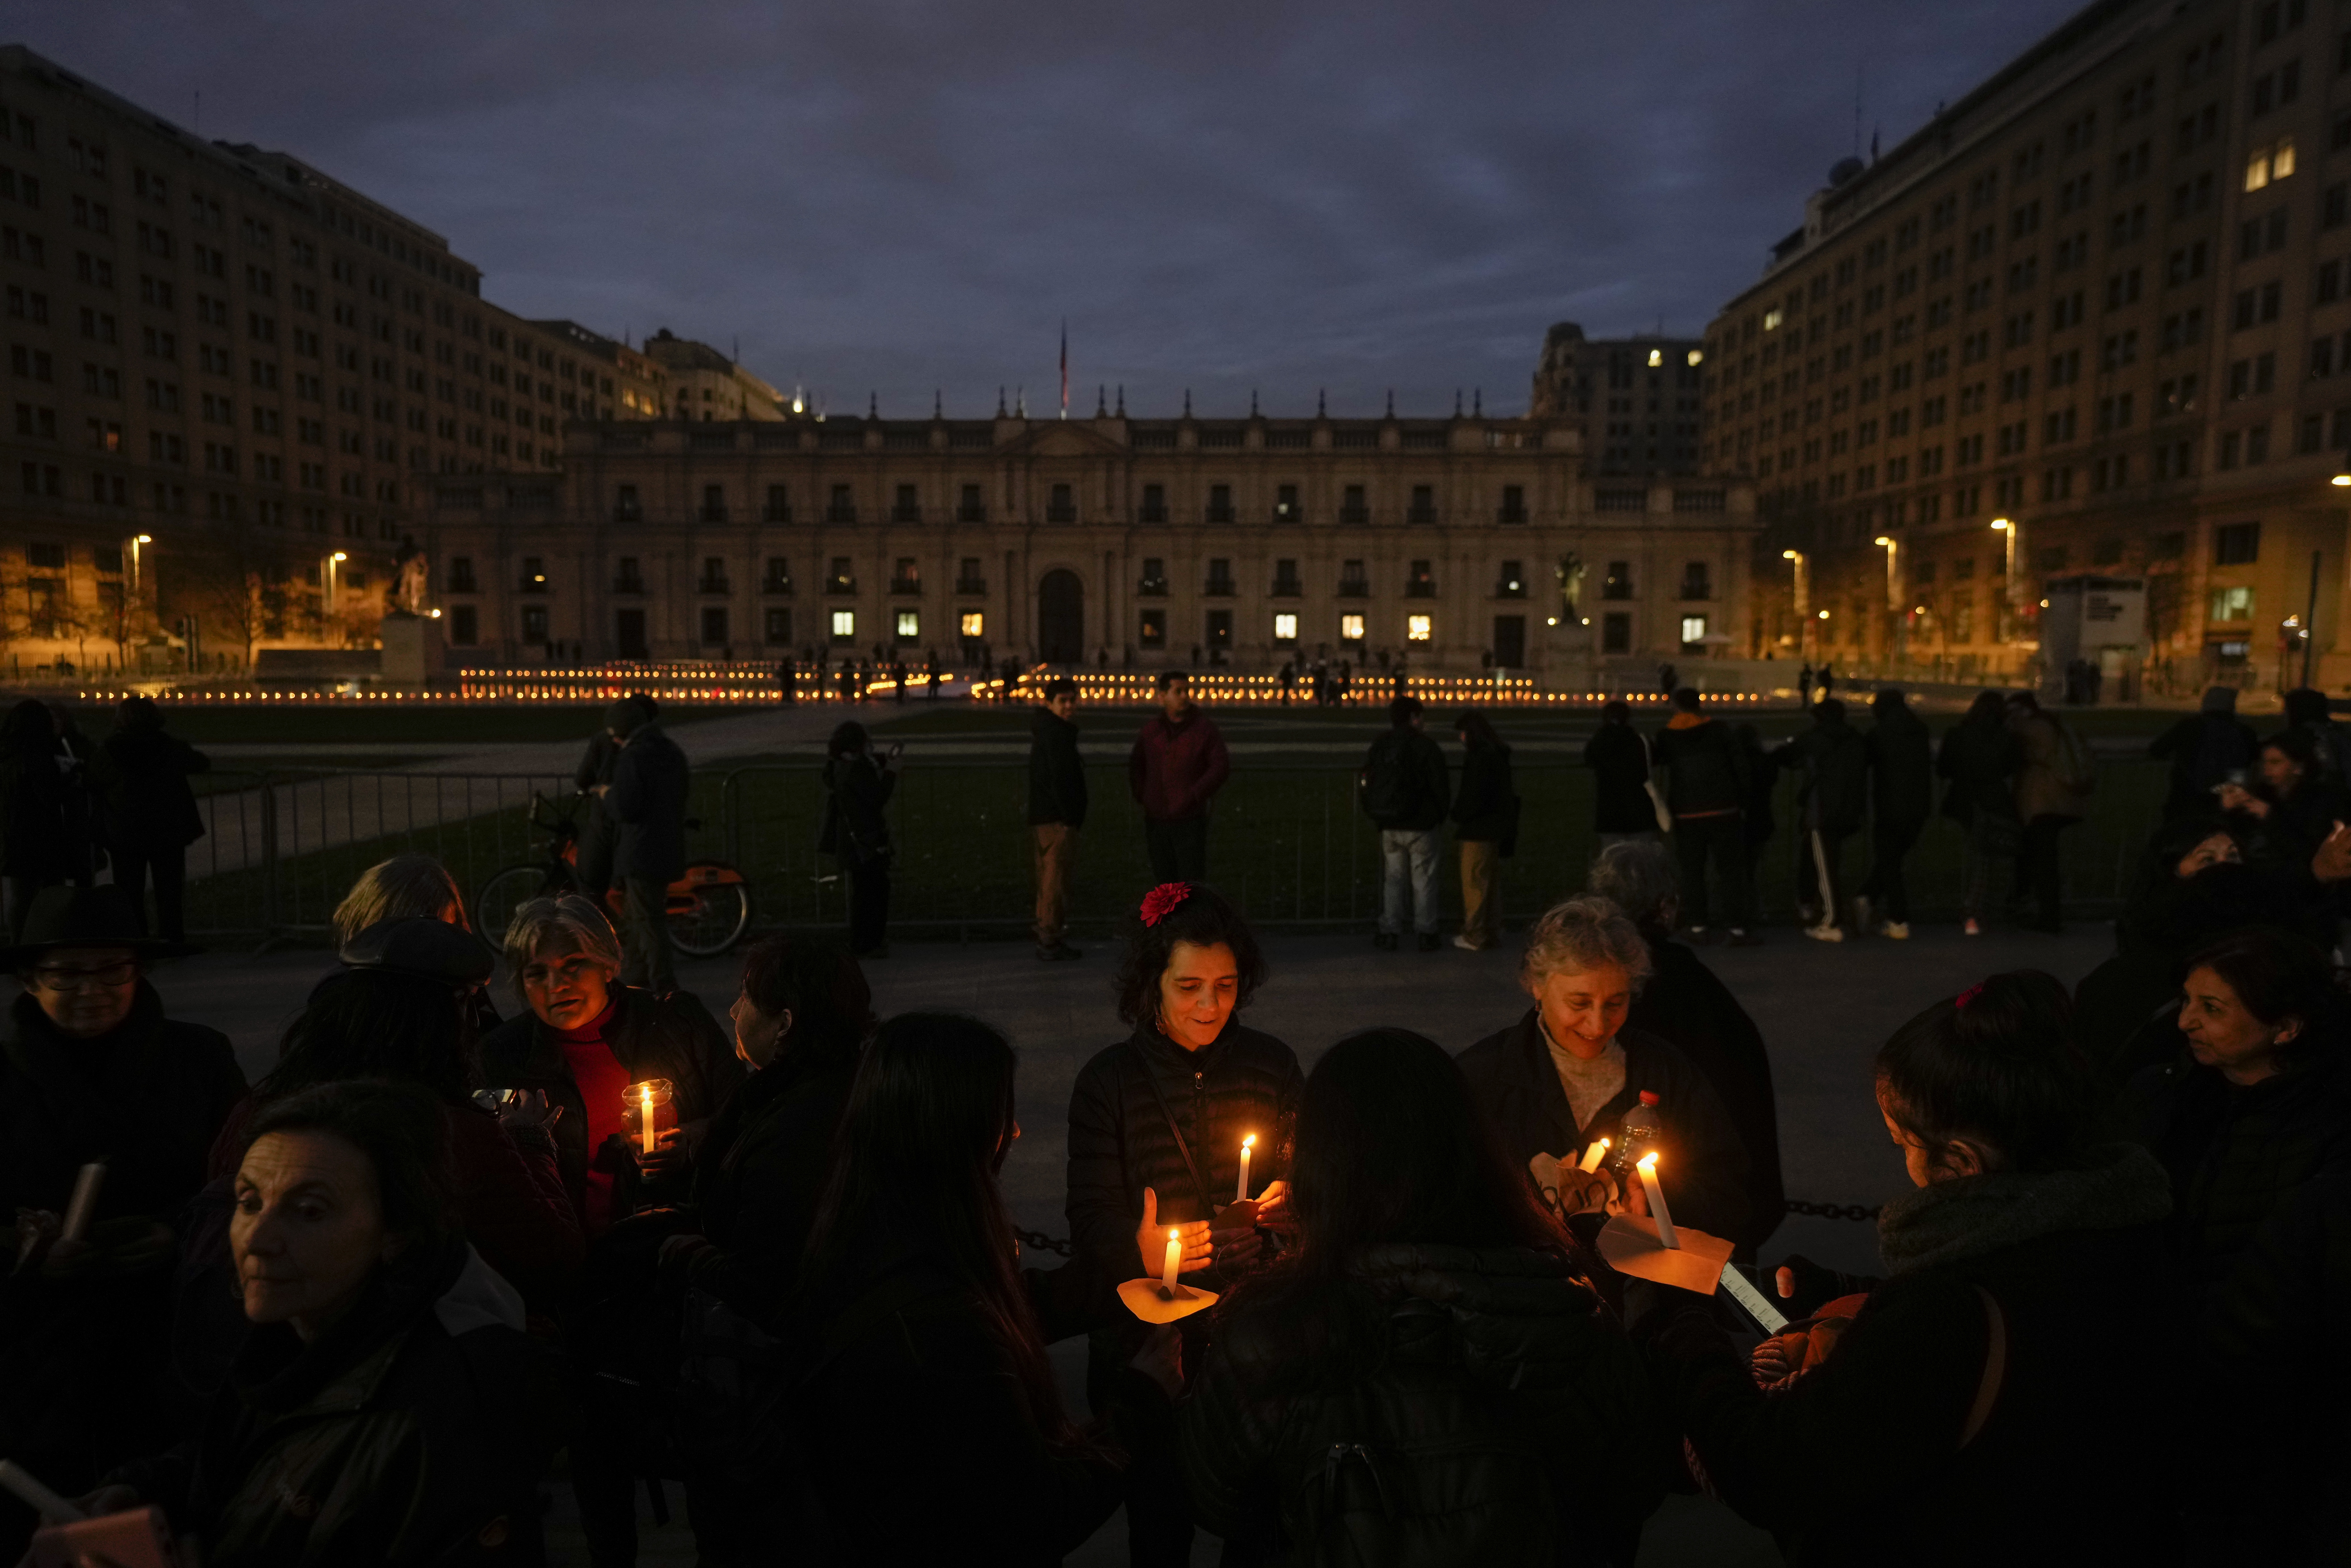 Women's rights activists hold candles during a vigil for the victims of the dictatorship of Gen. Augusto Pinochet, on the eve of the 50th anniversary of the Pinochet-led coup that toppled the elected government of late President Salvador Allende, as they walk around the La Moneda presidential palace in Santiago, Chile, Sunday, Sept. 10, 2023. (AP Photo/Esteban Felix)

Associated Press/LaPresse
Only Italy and Spain